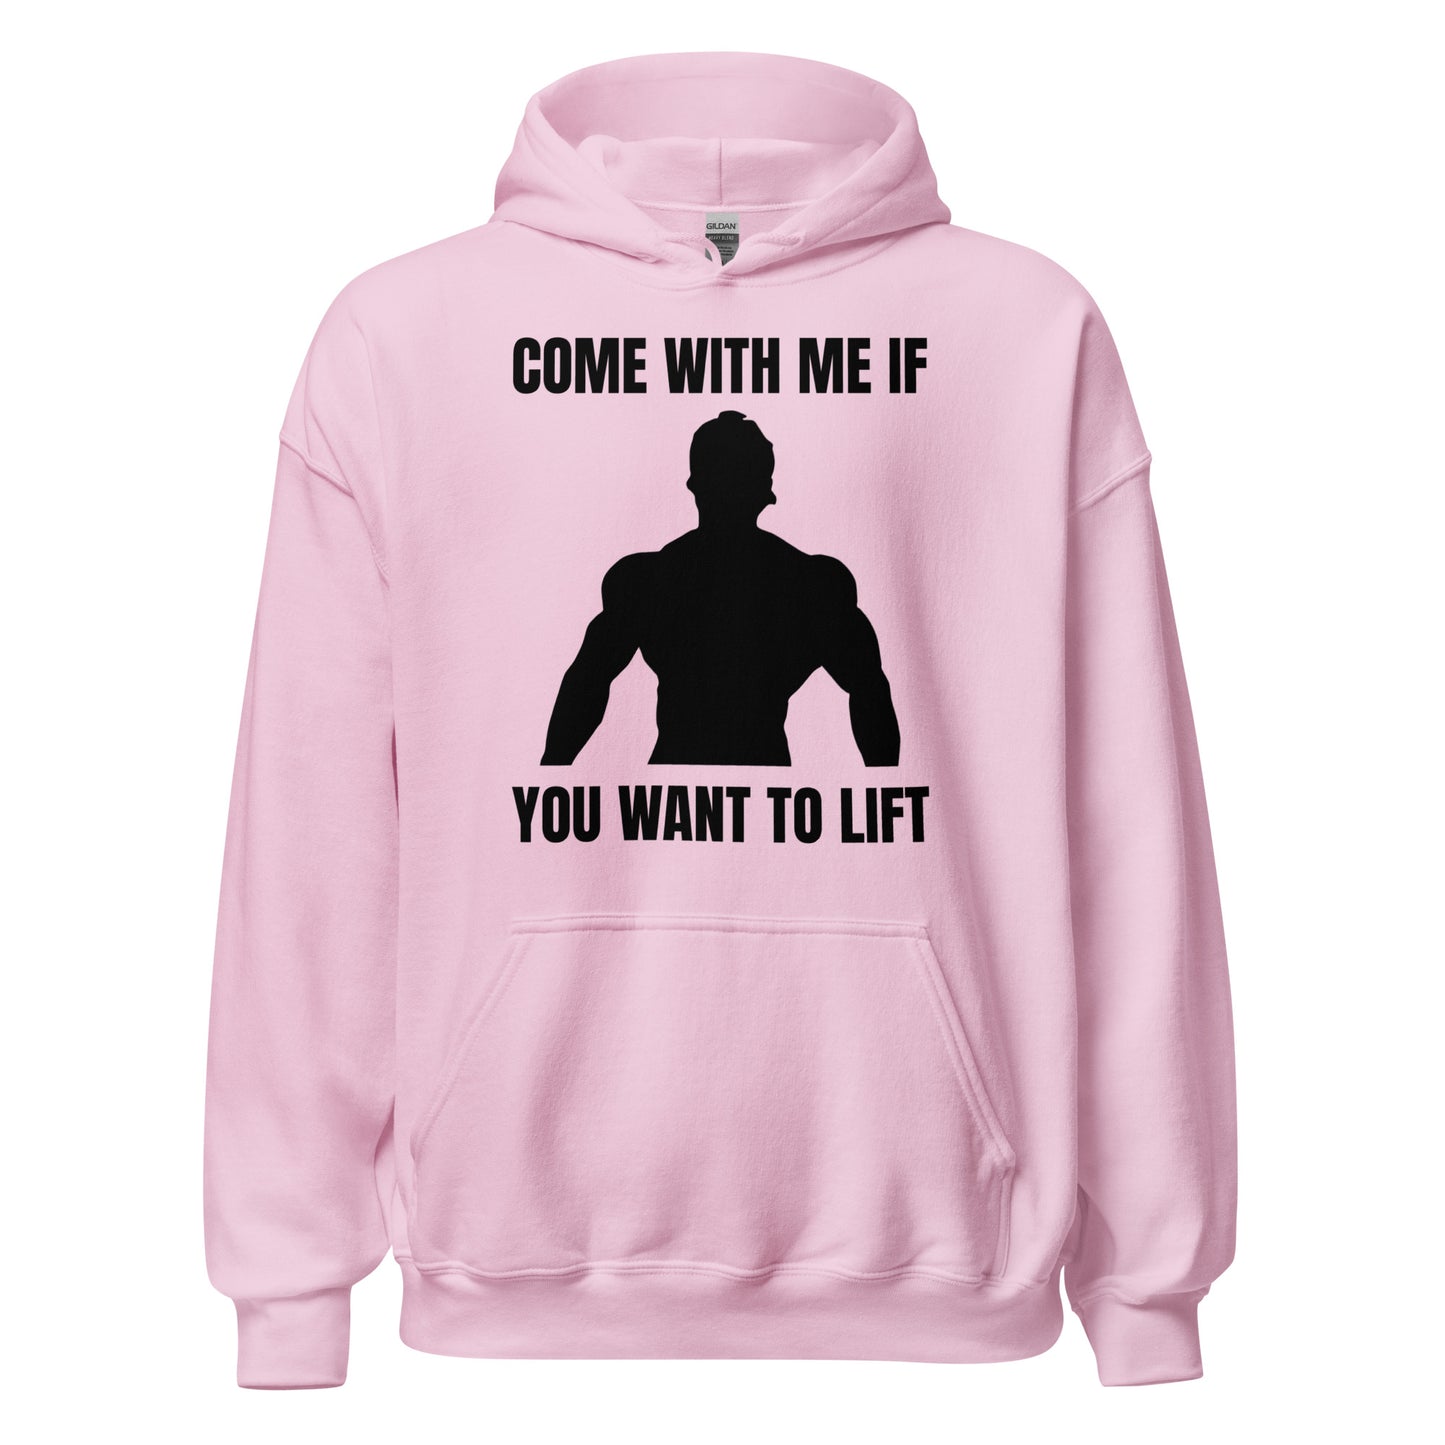 Come with Me if You Want to Lift Hoodie in Light Pink